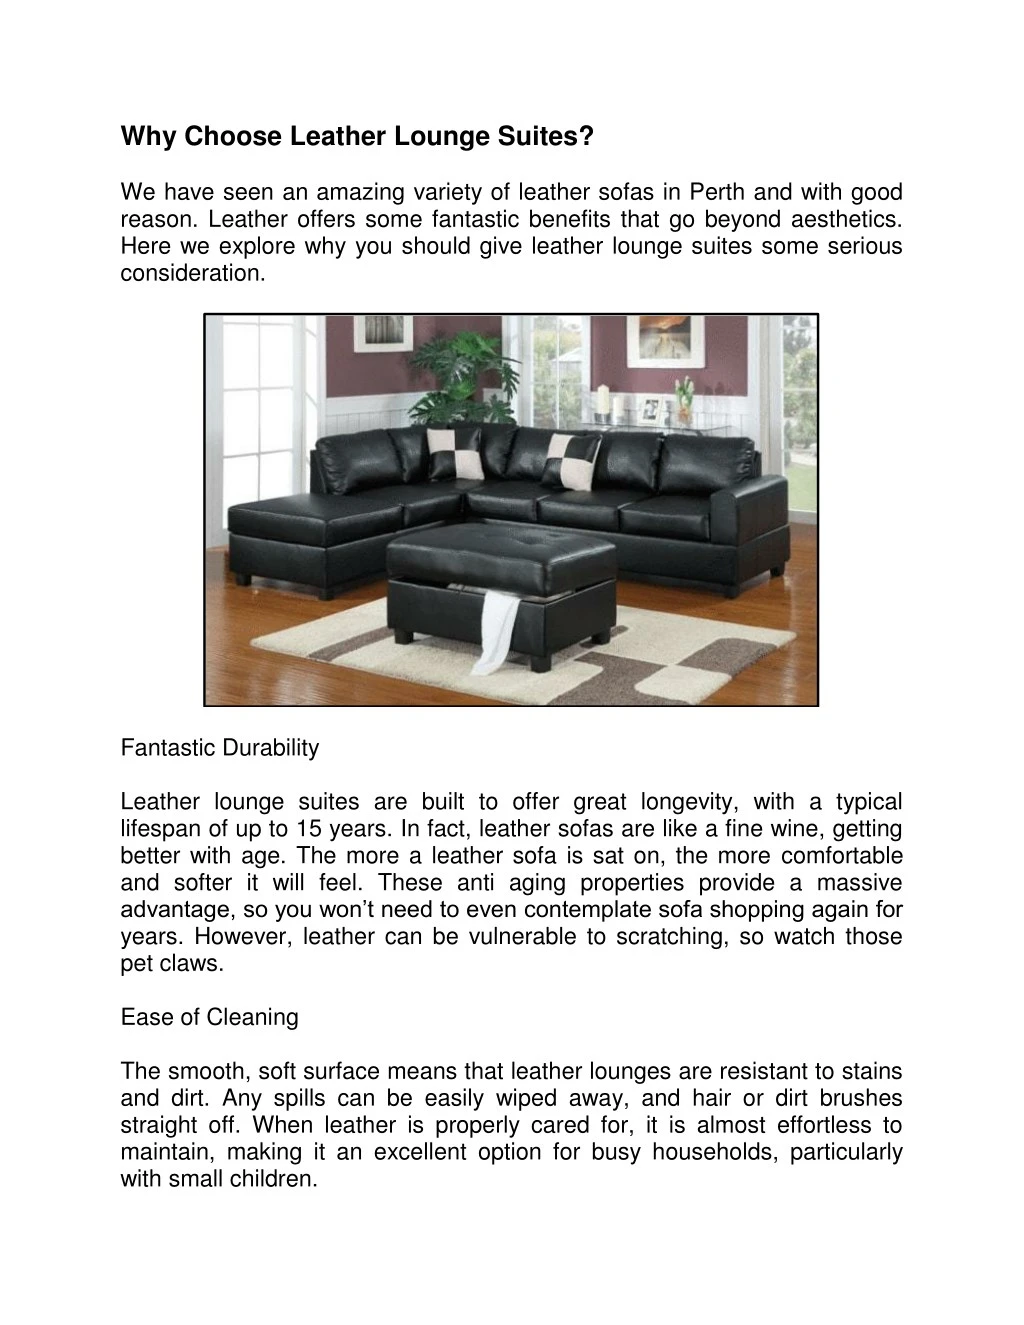 why choose leather lounge suites we have seen